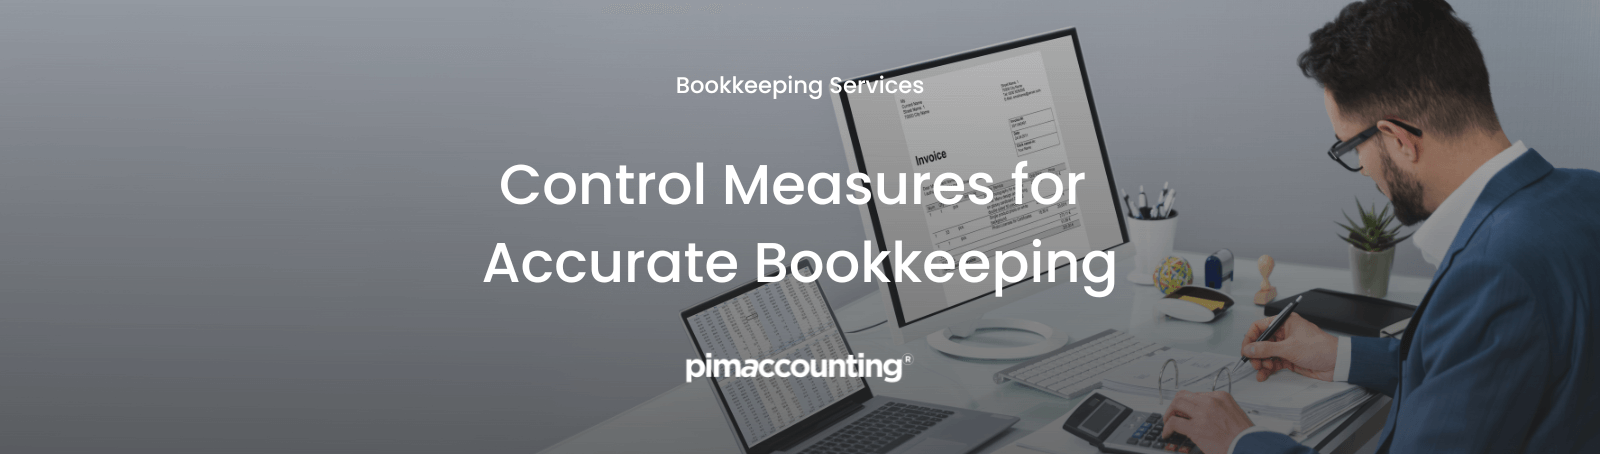 Control Measures for Accurate Bookkeeping